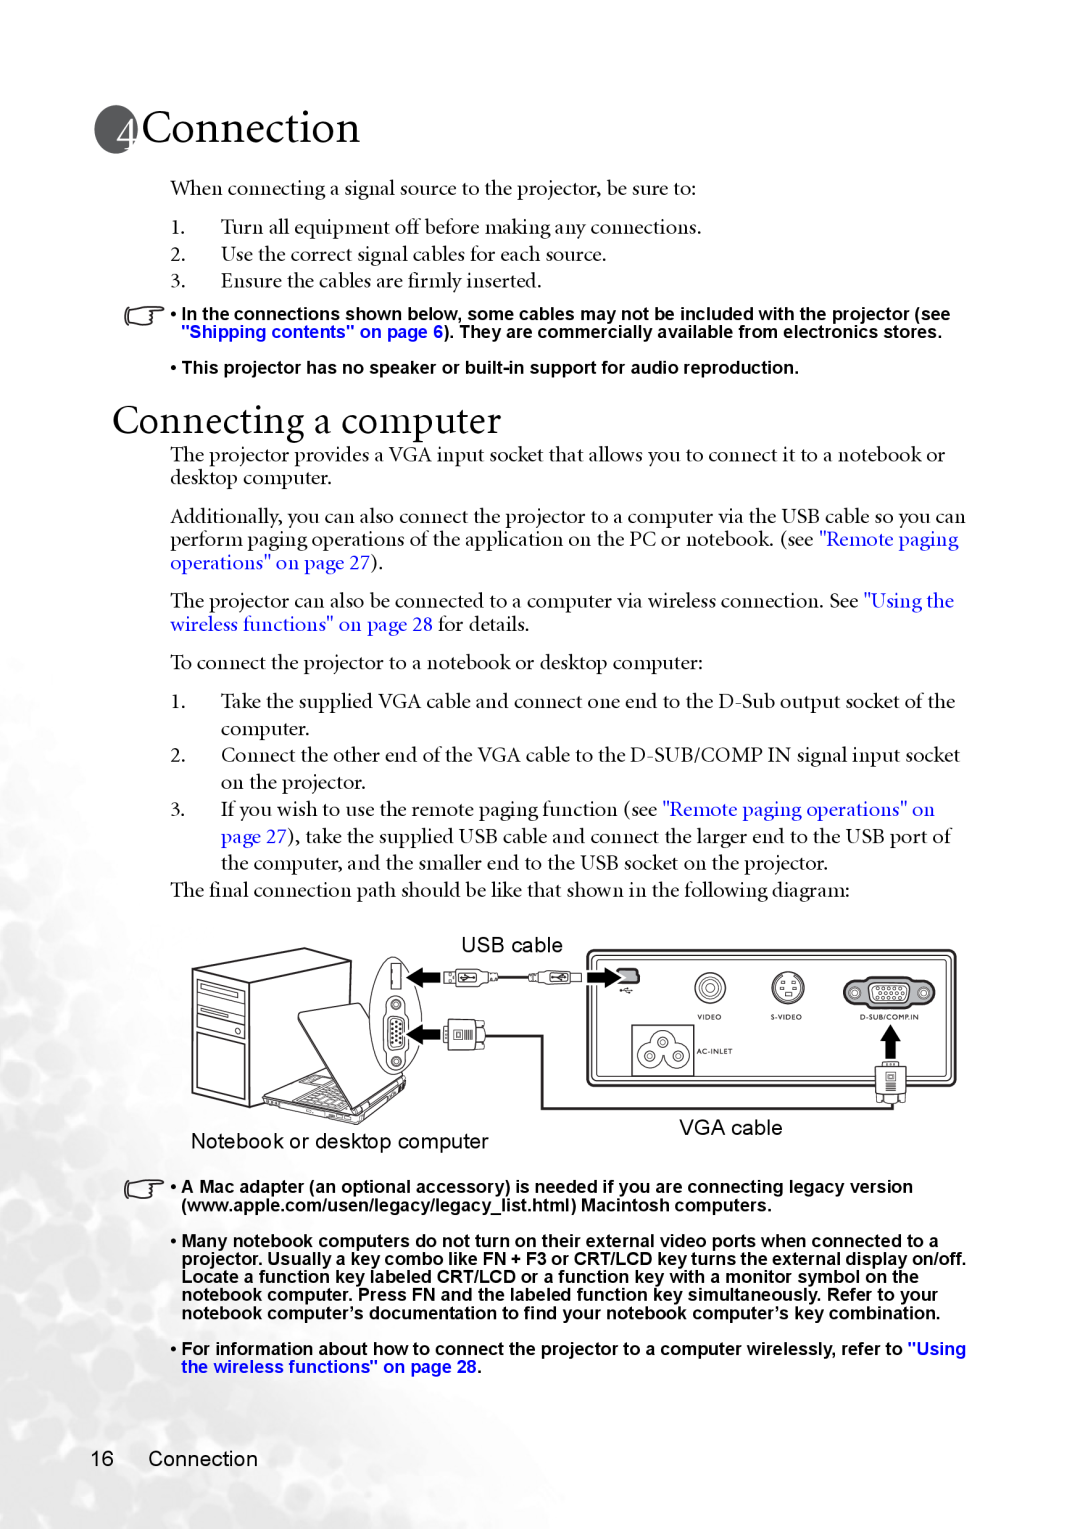 BenQ CP120 manual Connection, Connecting a computer 